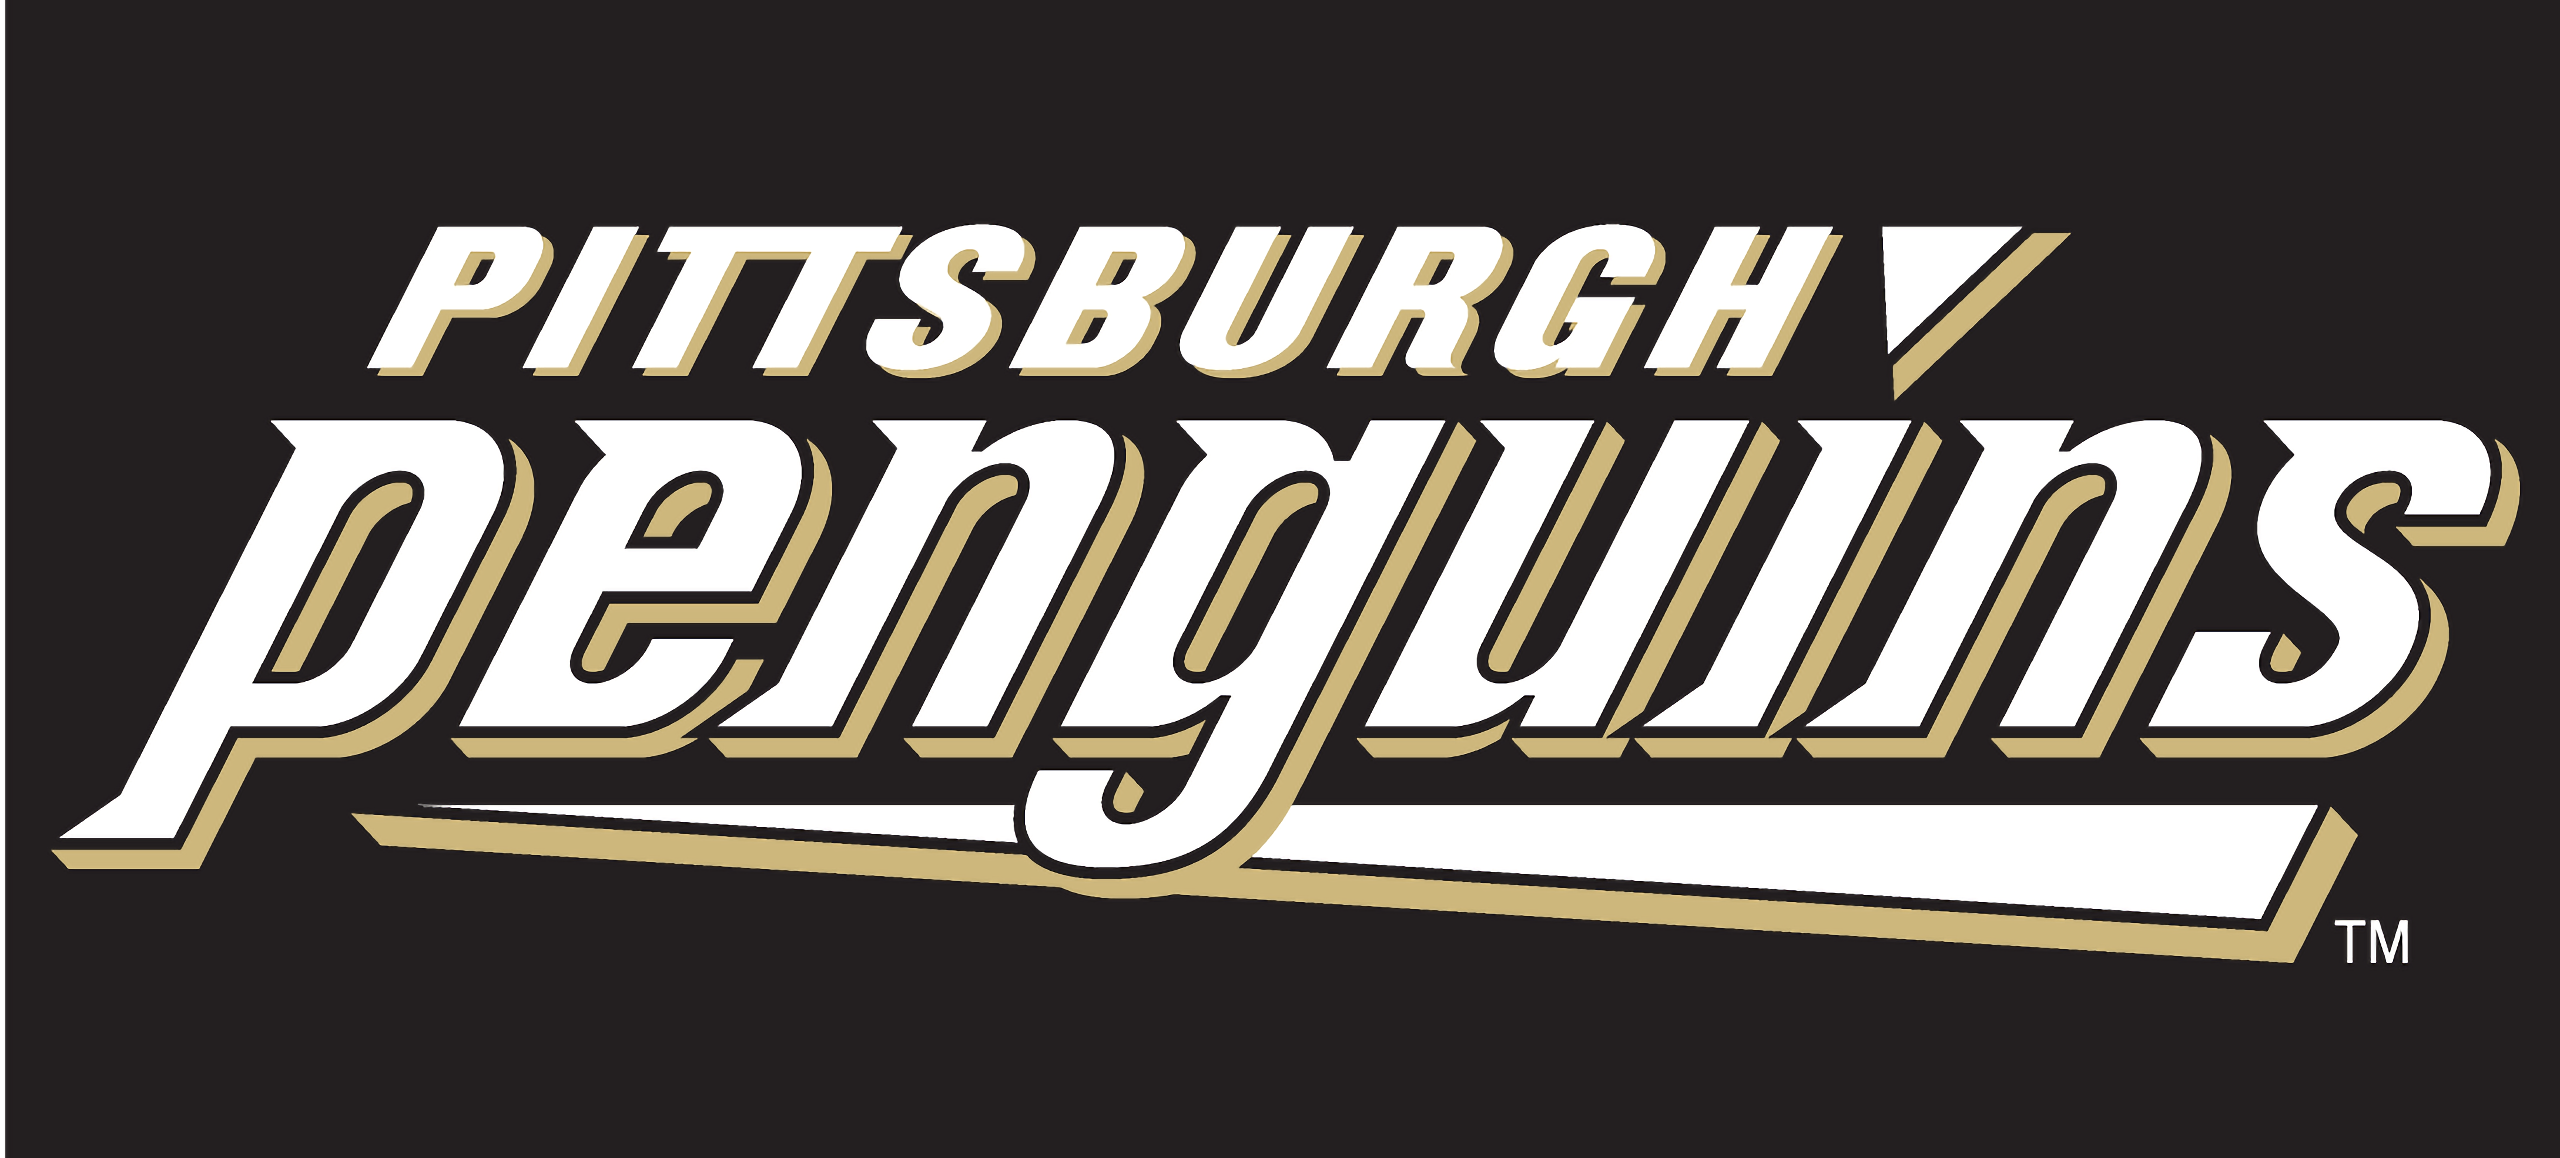 Pittsburgh Penguins 2560x1158